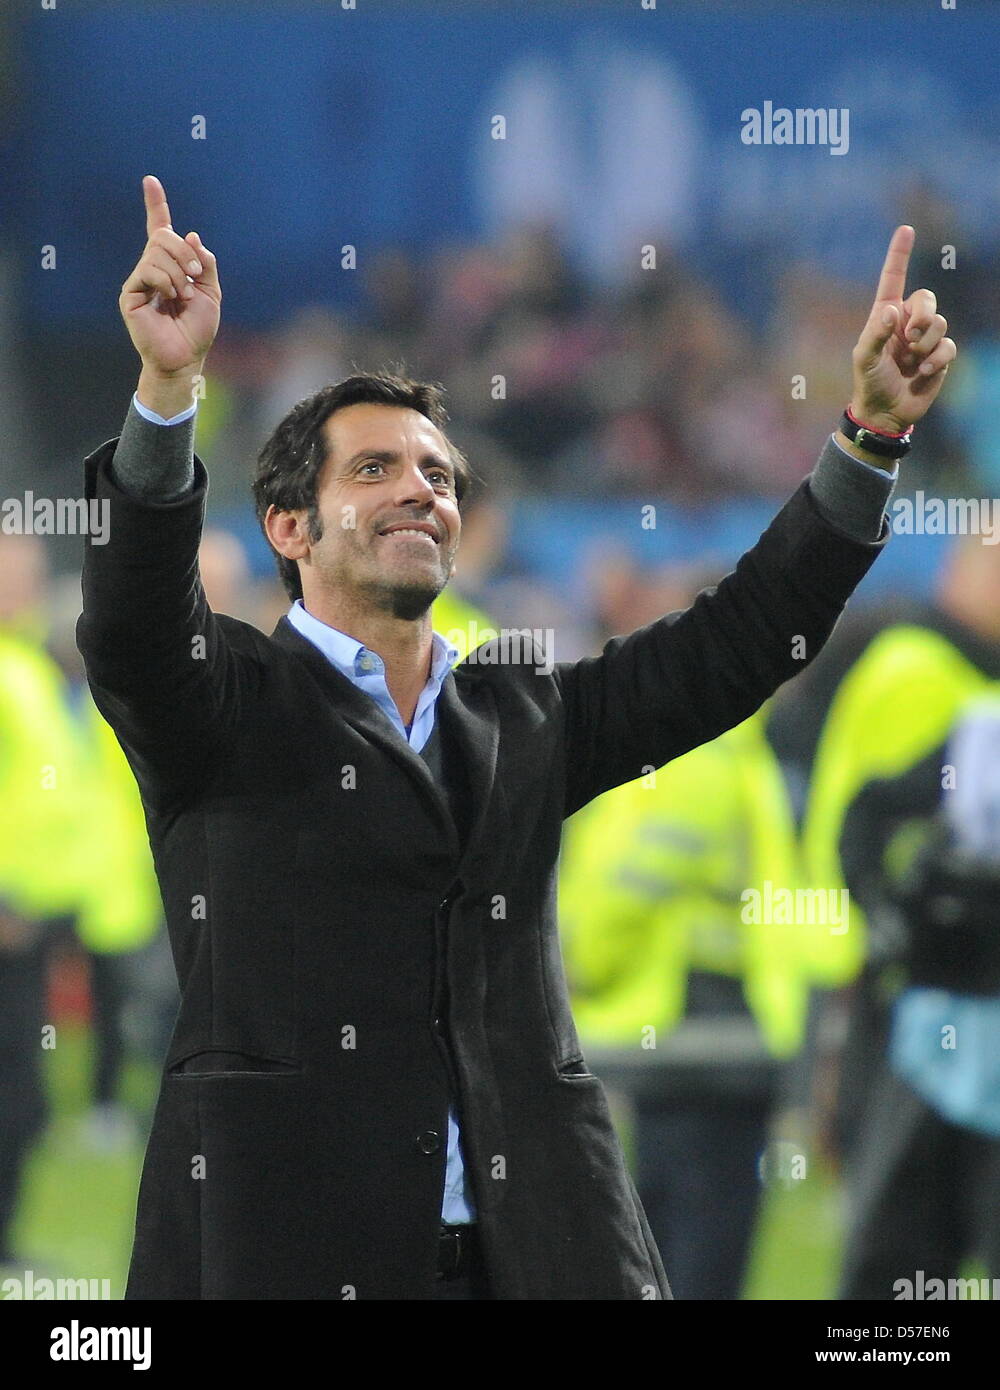 Atletico Madrid's head coach Quique Sanchez Flores celebrates after UEFA Europa League final match between FC Fulham and Atletico Madrid at Hamburg Arena, Hamburg, Germany, 12 May 2010. Photo: Marcus Brandt dpa NO MOBILE DEVICES  +++(c) dpa - Bildfunk+++ Stock Photo